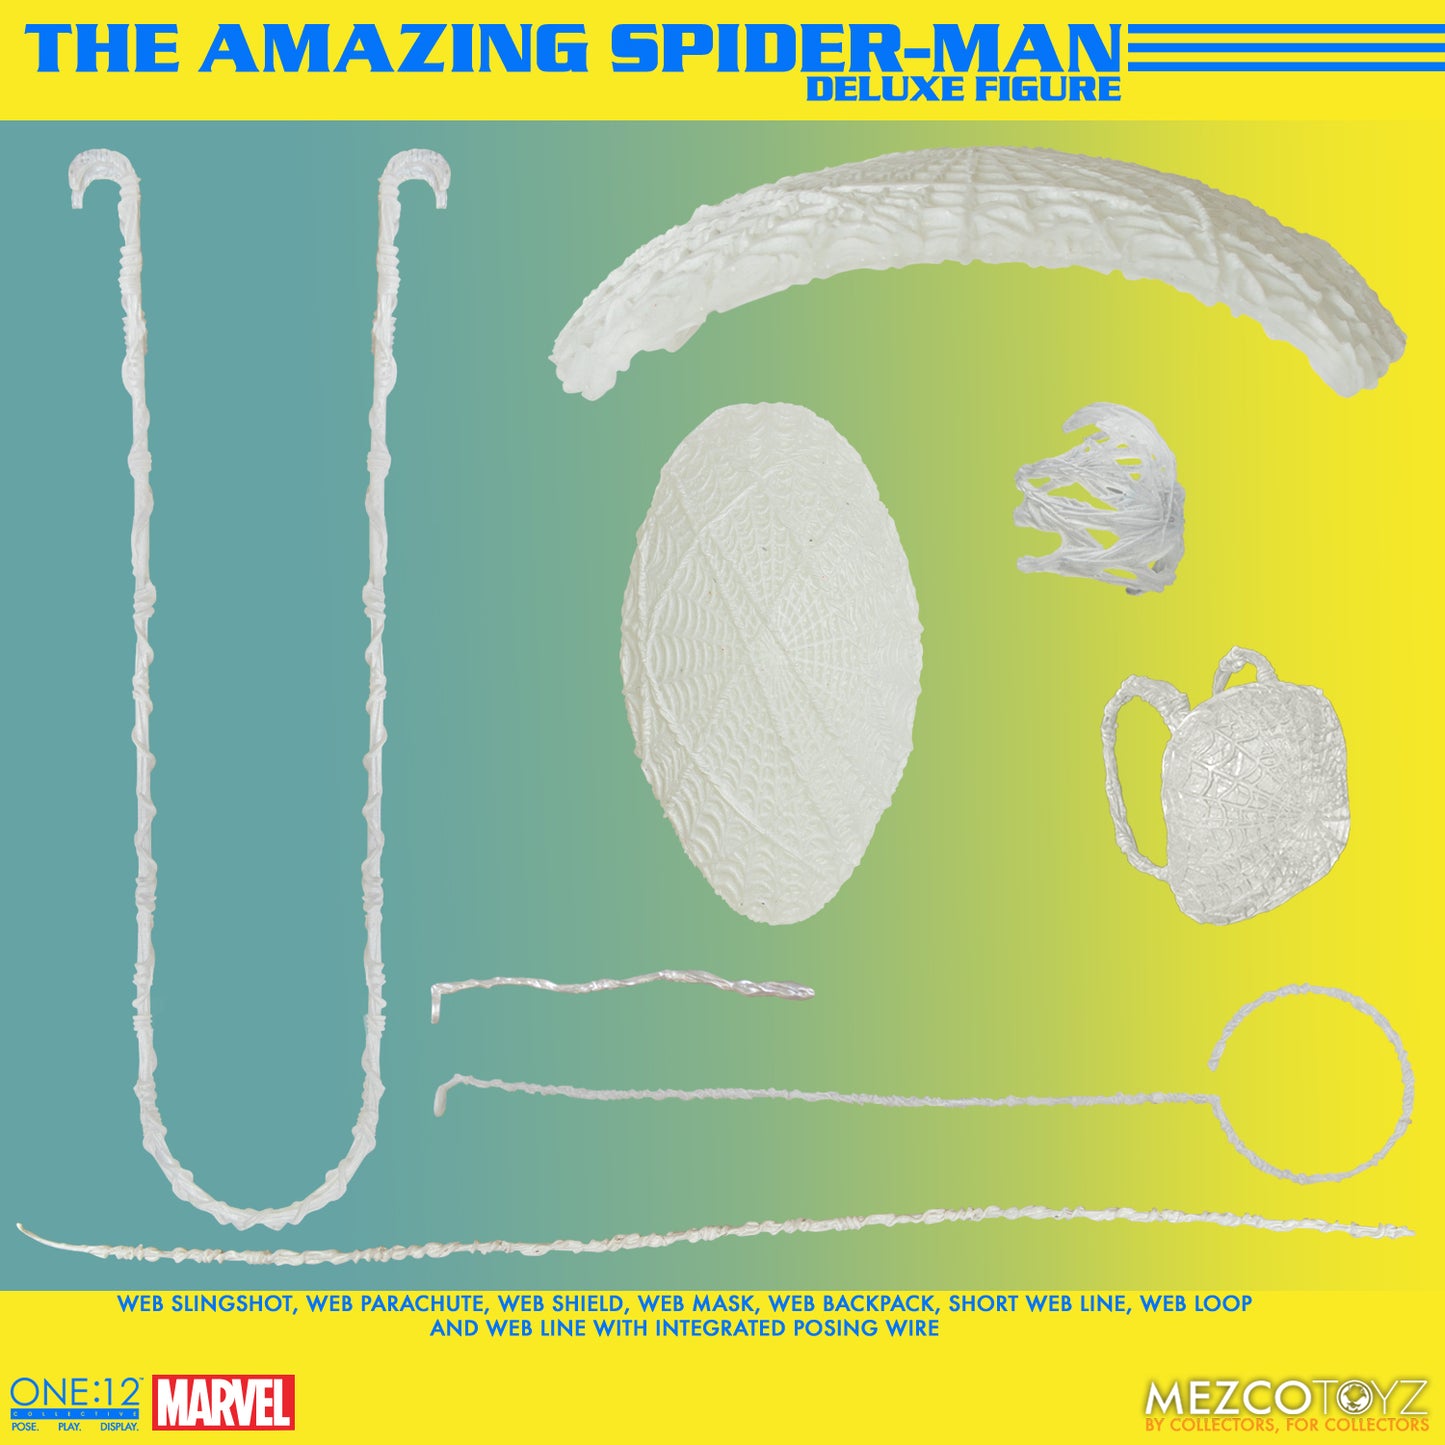 ONE-12 COLLECTIVE MARVEL AMAZING SPIDER-MAN DELUXE AF